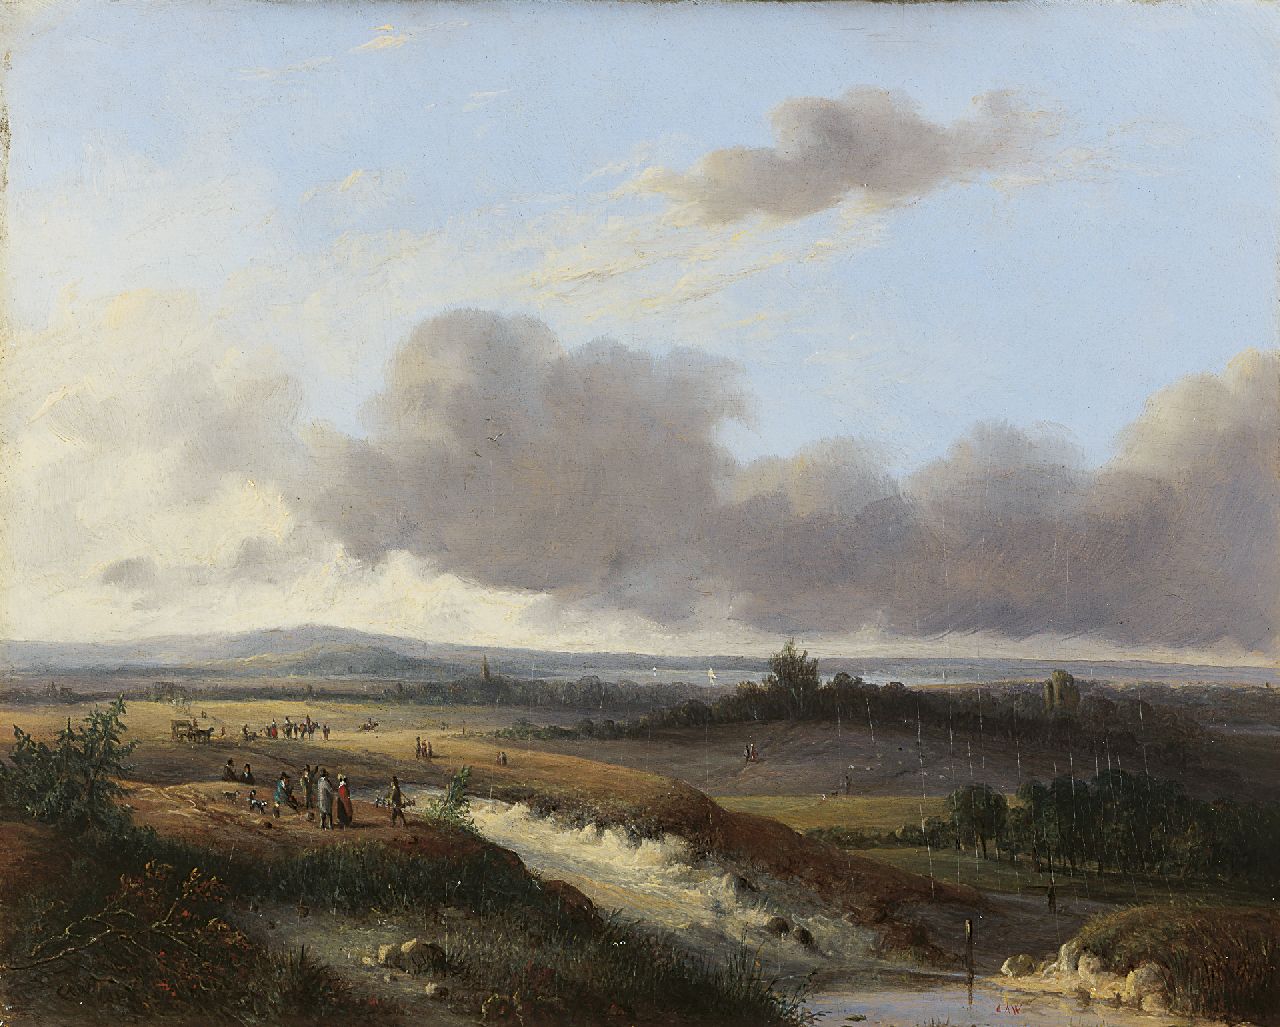 Weerts C.A.  | Coenraad Alexander Weerts, Figures in an extensive landscape, oil on panel 22.5 x 28.2 cm, signed l.l. and l.r. with initials